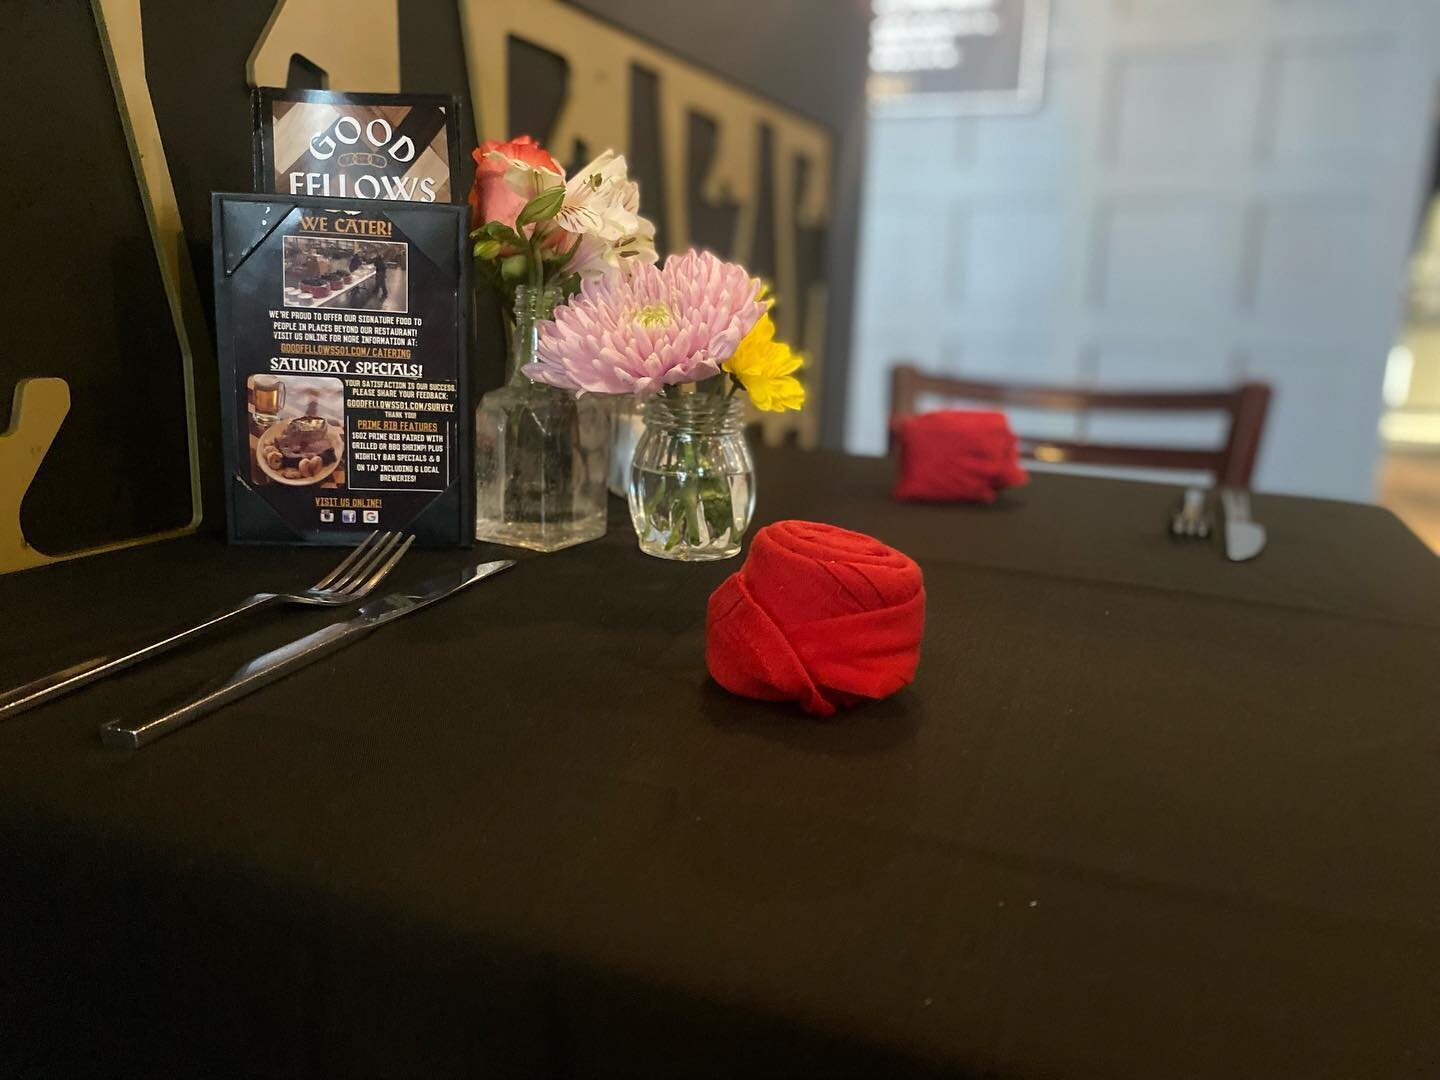 Join us today for a special Mother&rsquo;s Day lunch buffet! Our all-you-can-eat buffet features buttermilk brined chicken, smoked pork loin, roast beef, and brown sugar glazed ham! Plus soup &amp; salad bar, bloody Mary&rsquo;s, and mimosas! We&rsqu